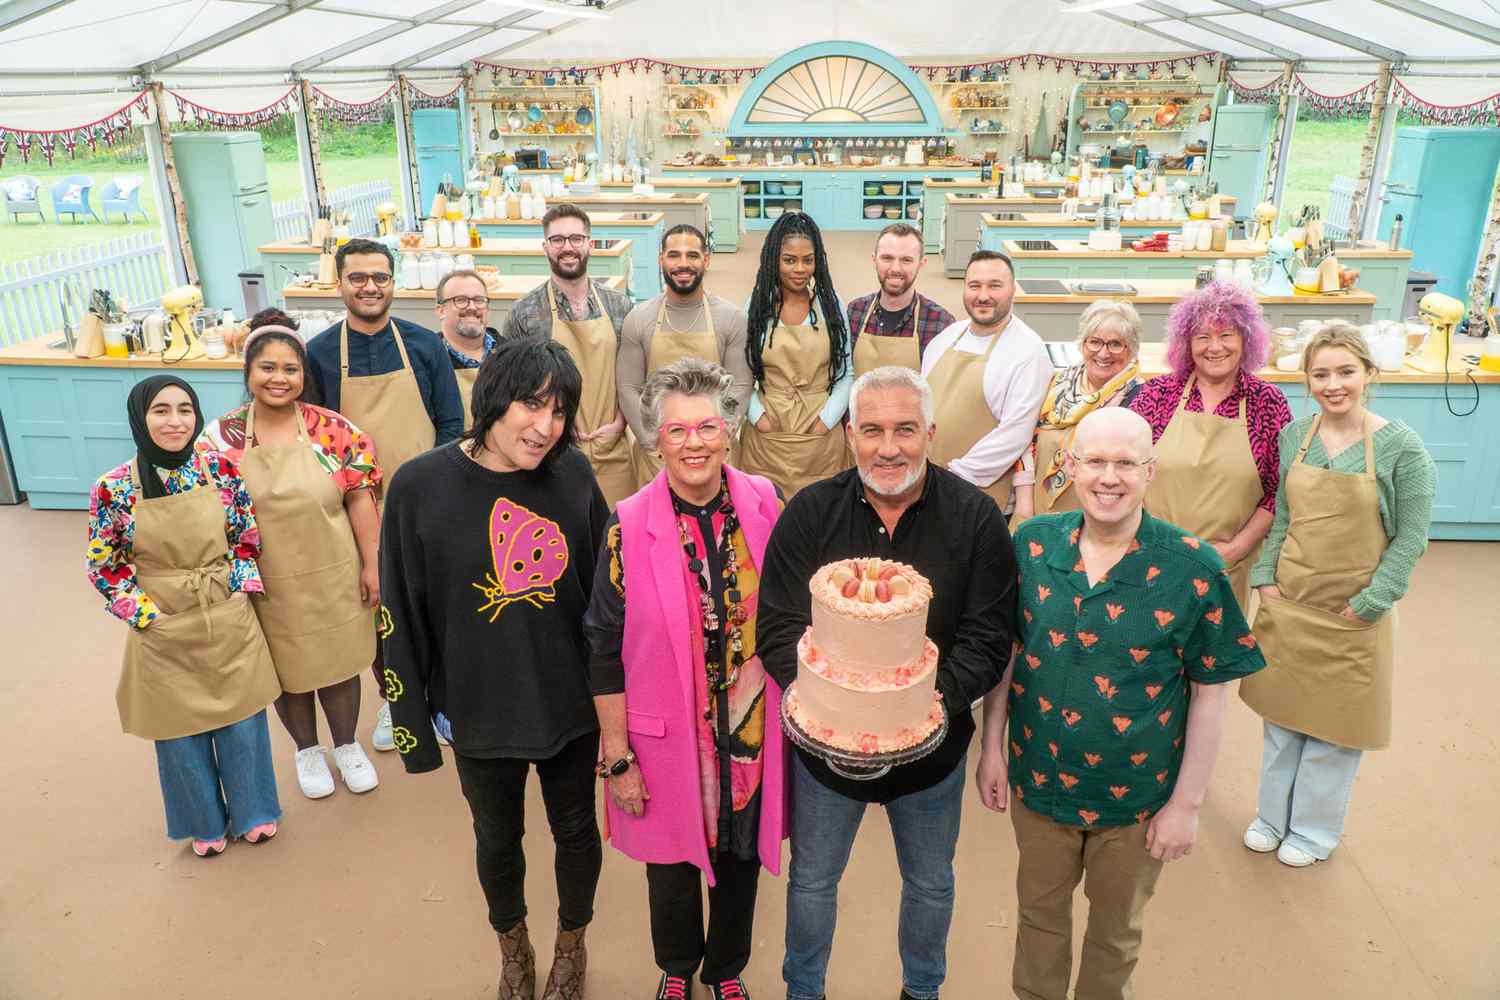 8 Shows Like The Great British Baking Show You Must See